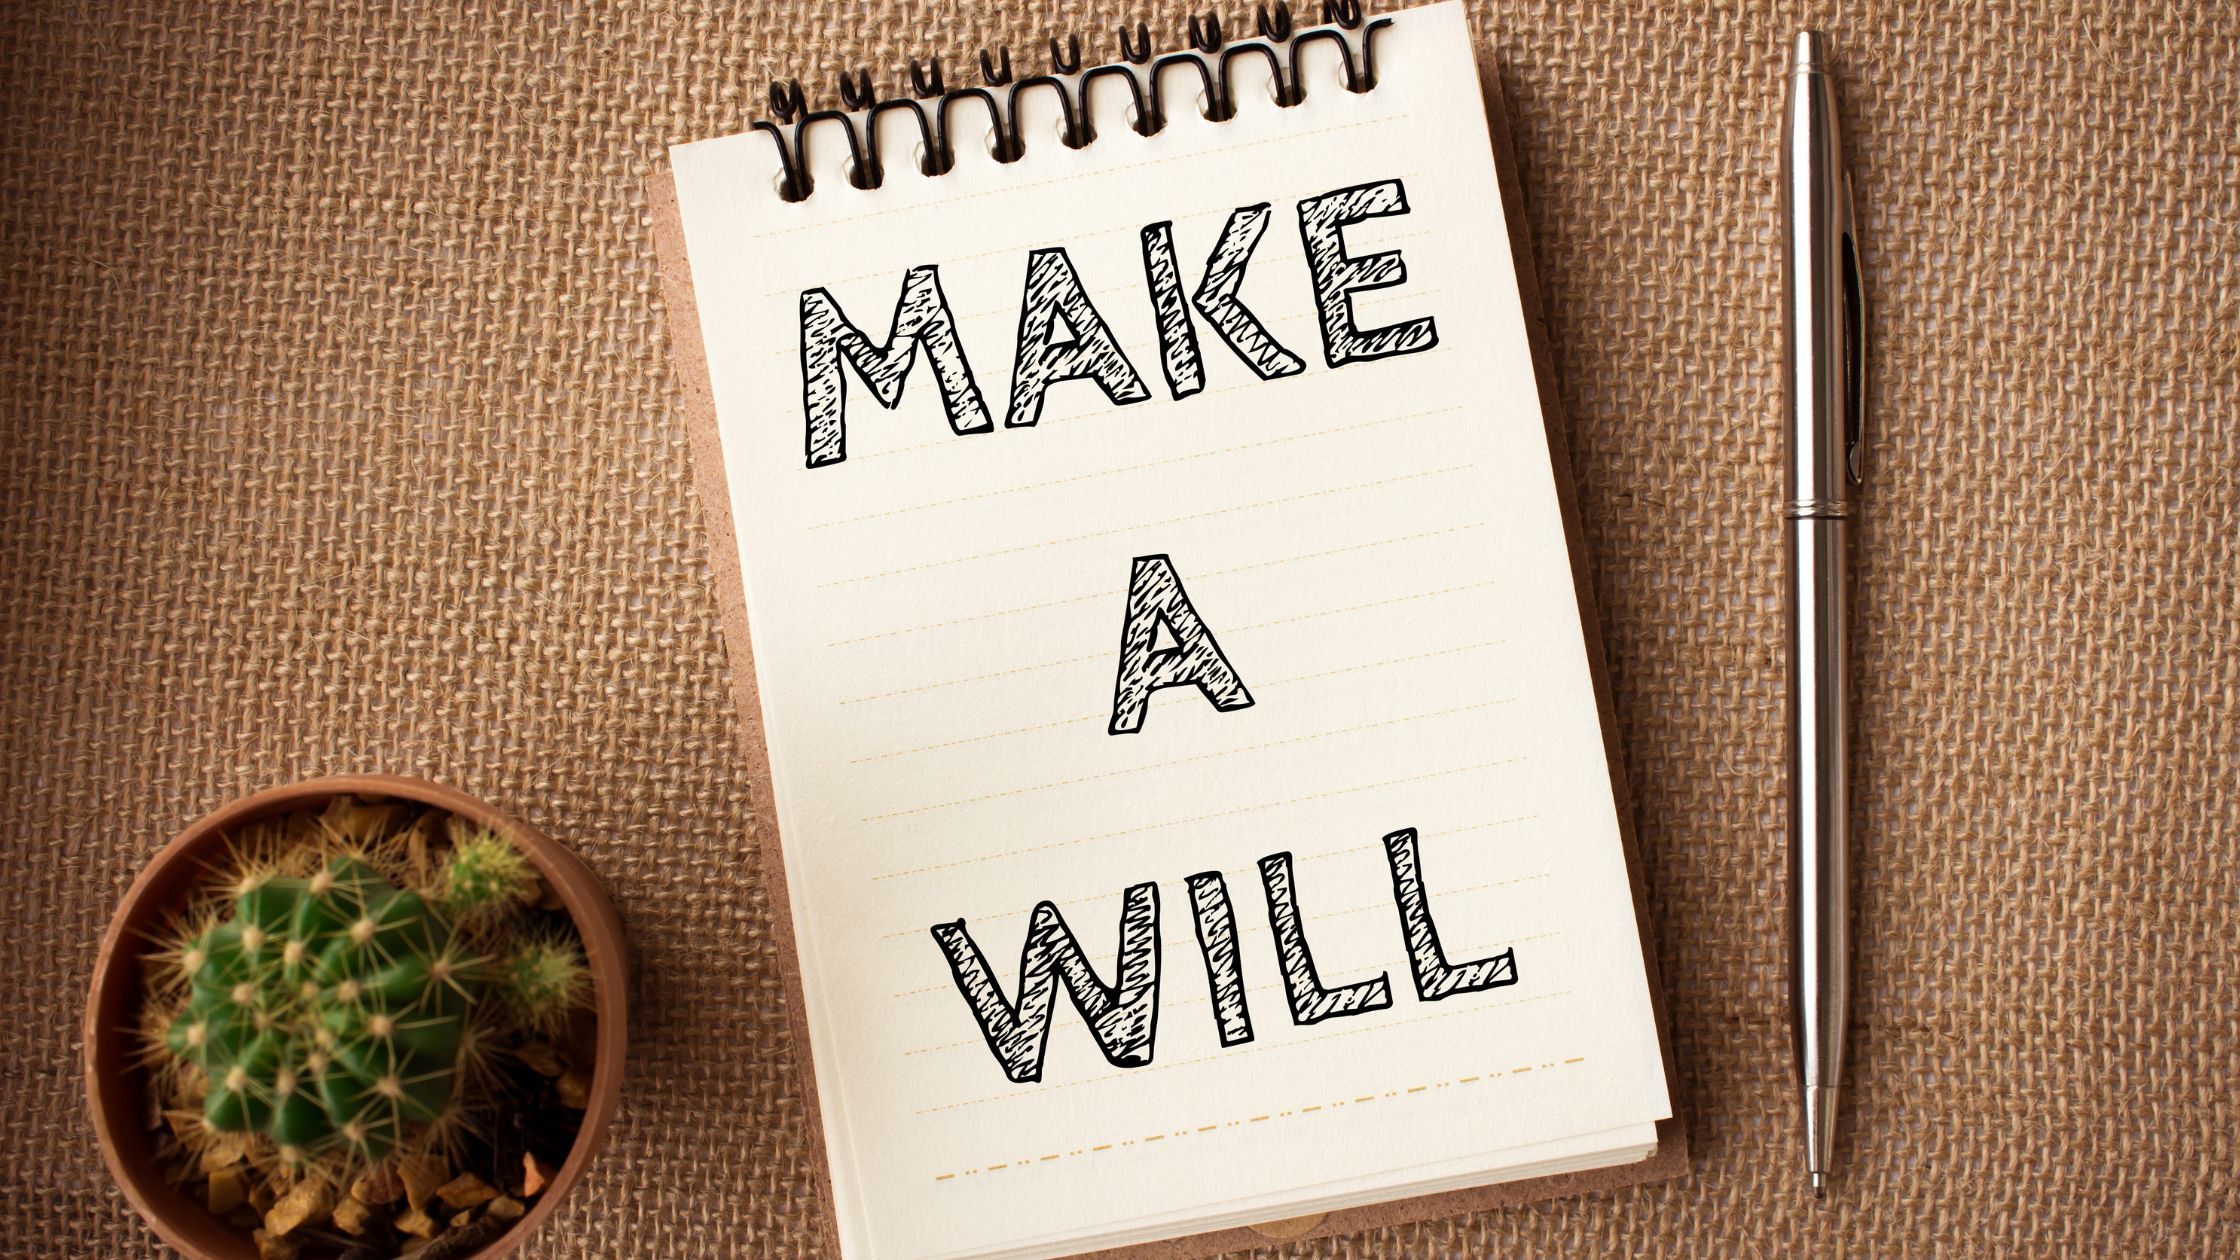 I’ve just bought a house – do I need a Will?